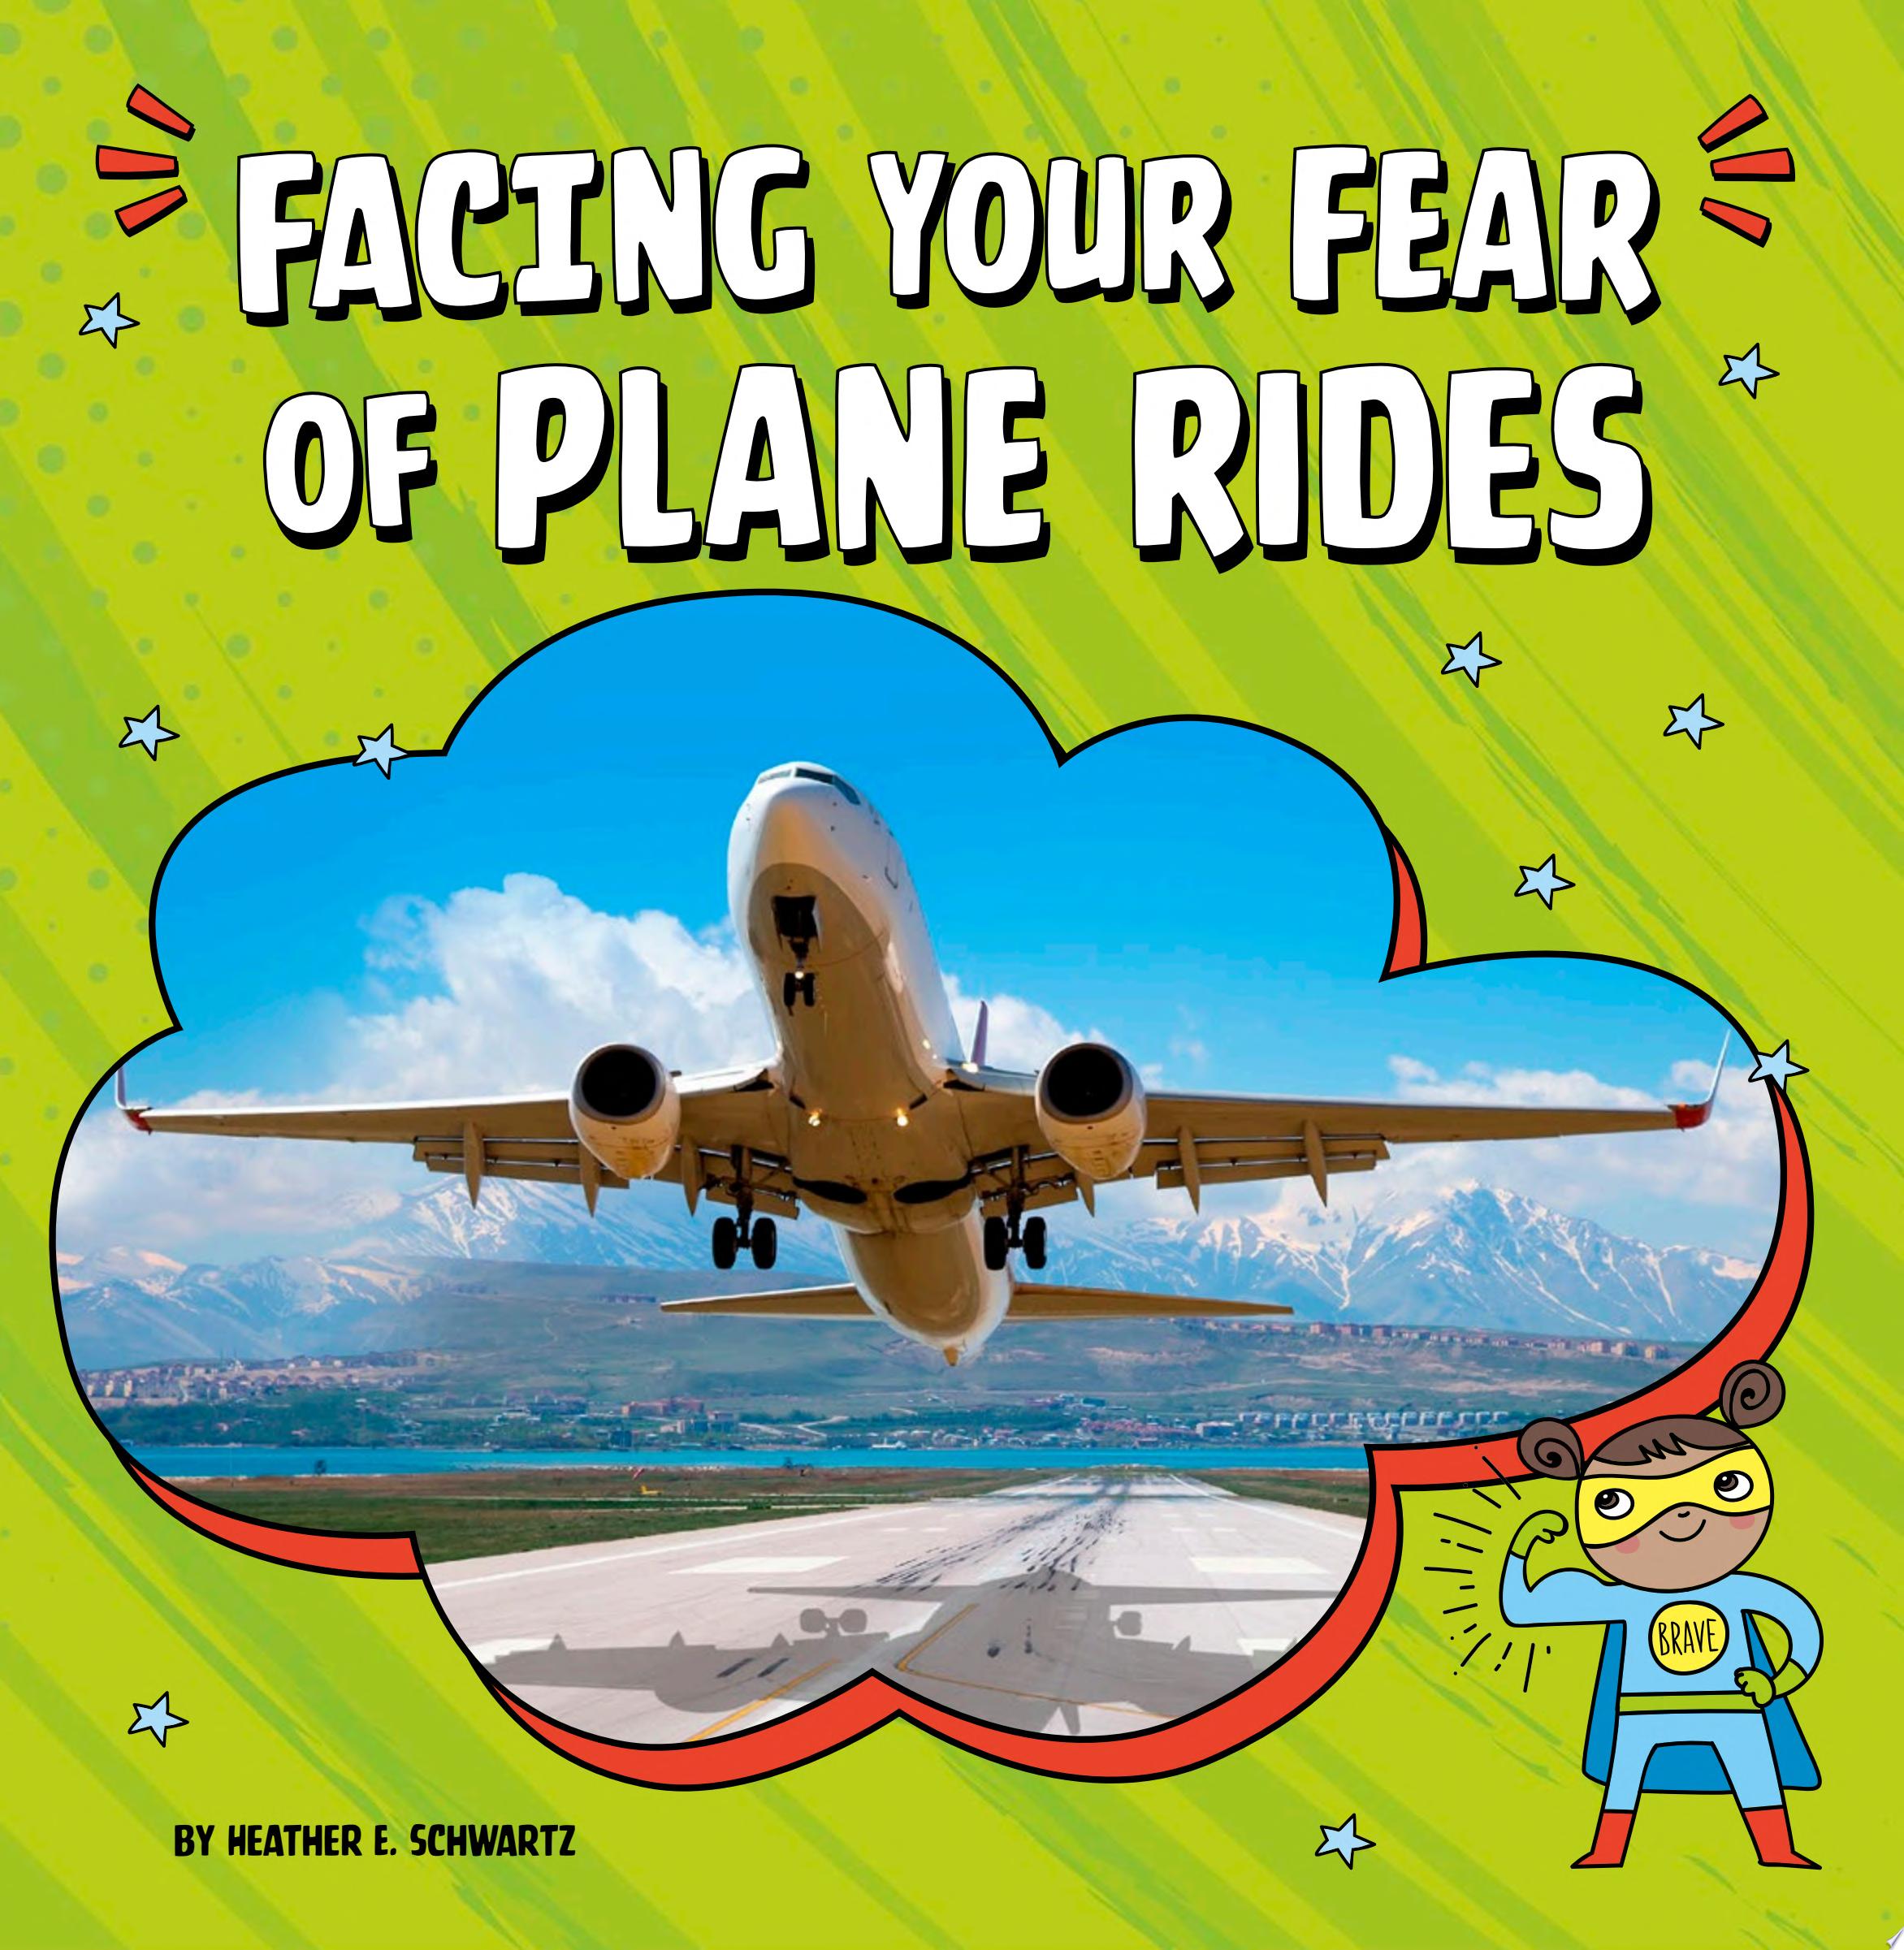 Image for "Facing Your Fear of Plane Rides"